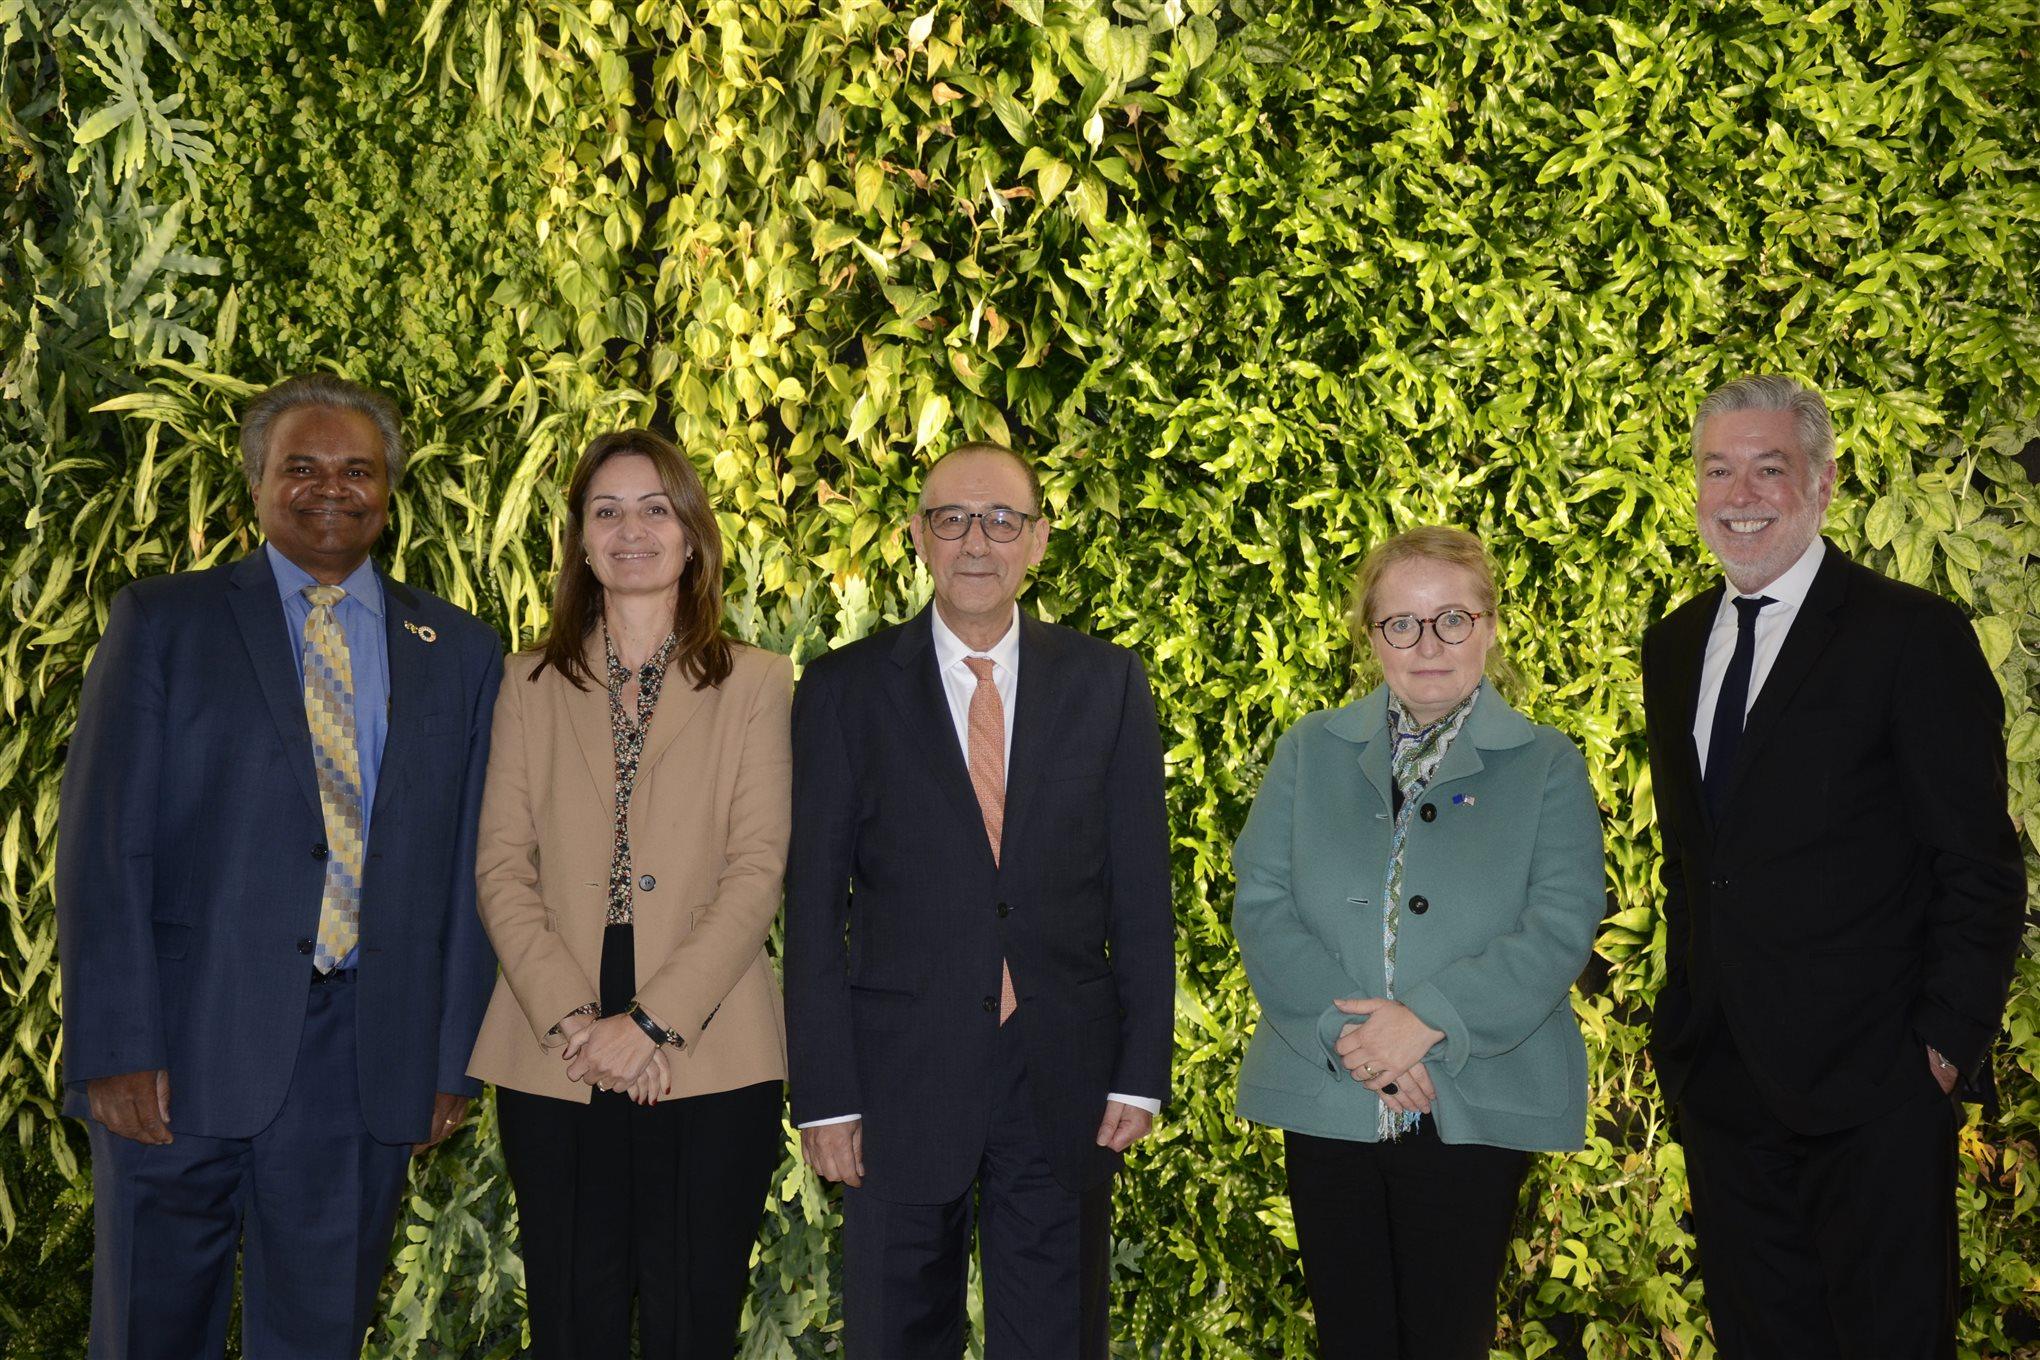 EU ambassadors with Mathy Stanislaus and John Fry, posed in front of Drexel&#39;s Biowall.